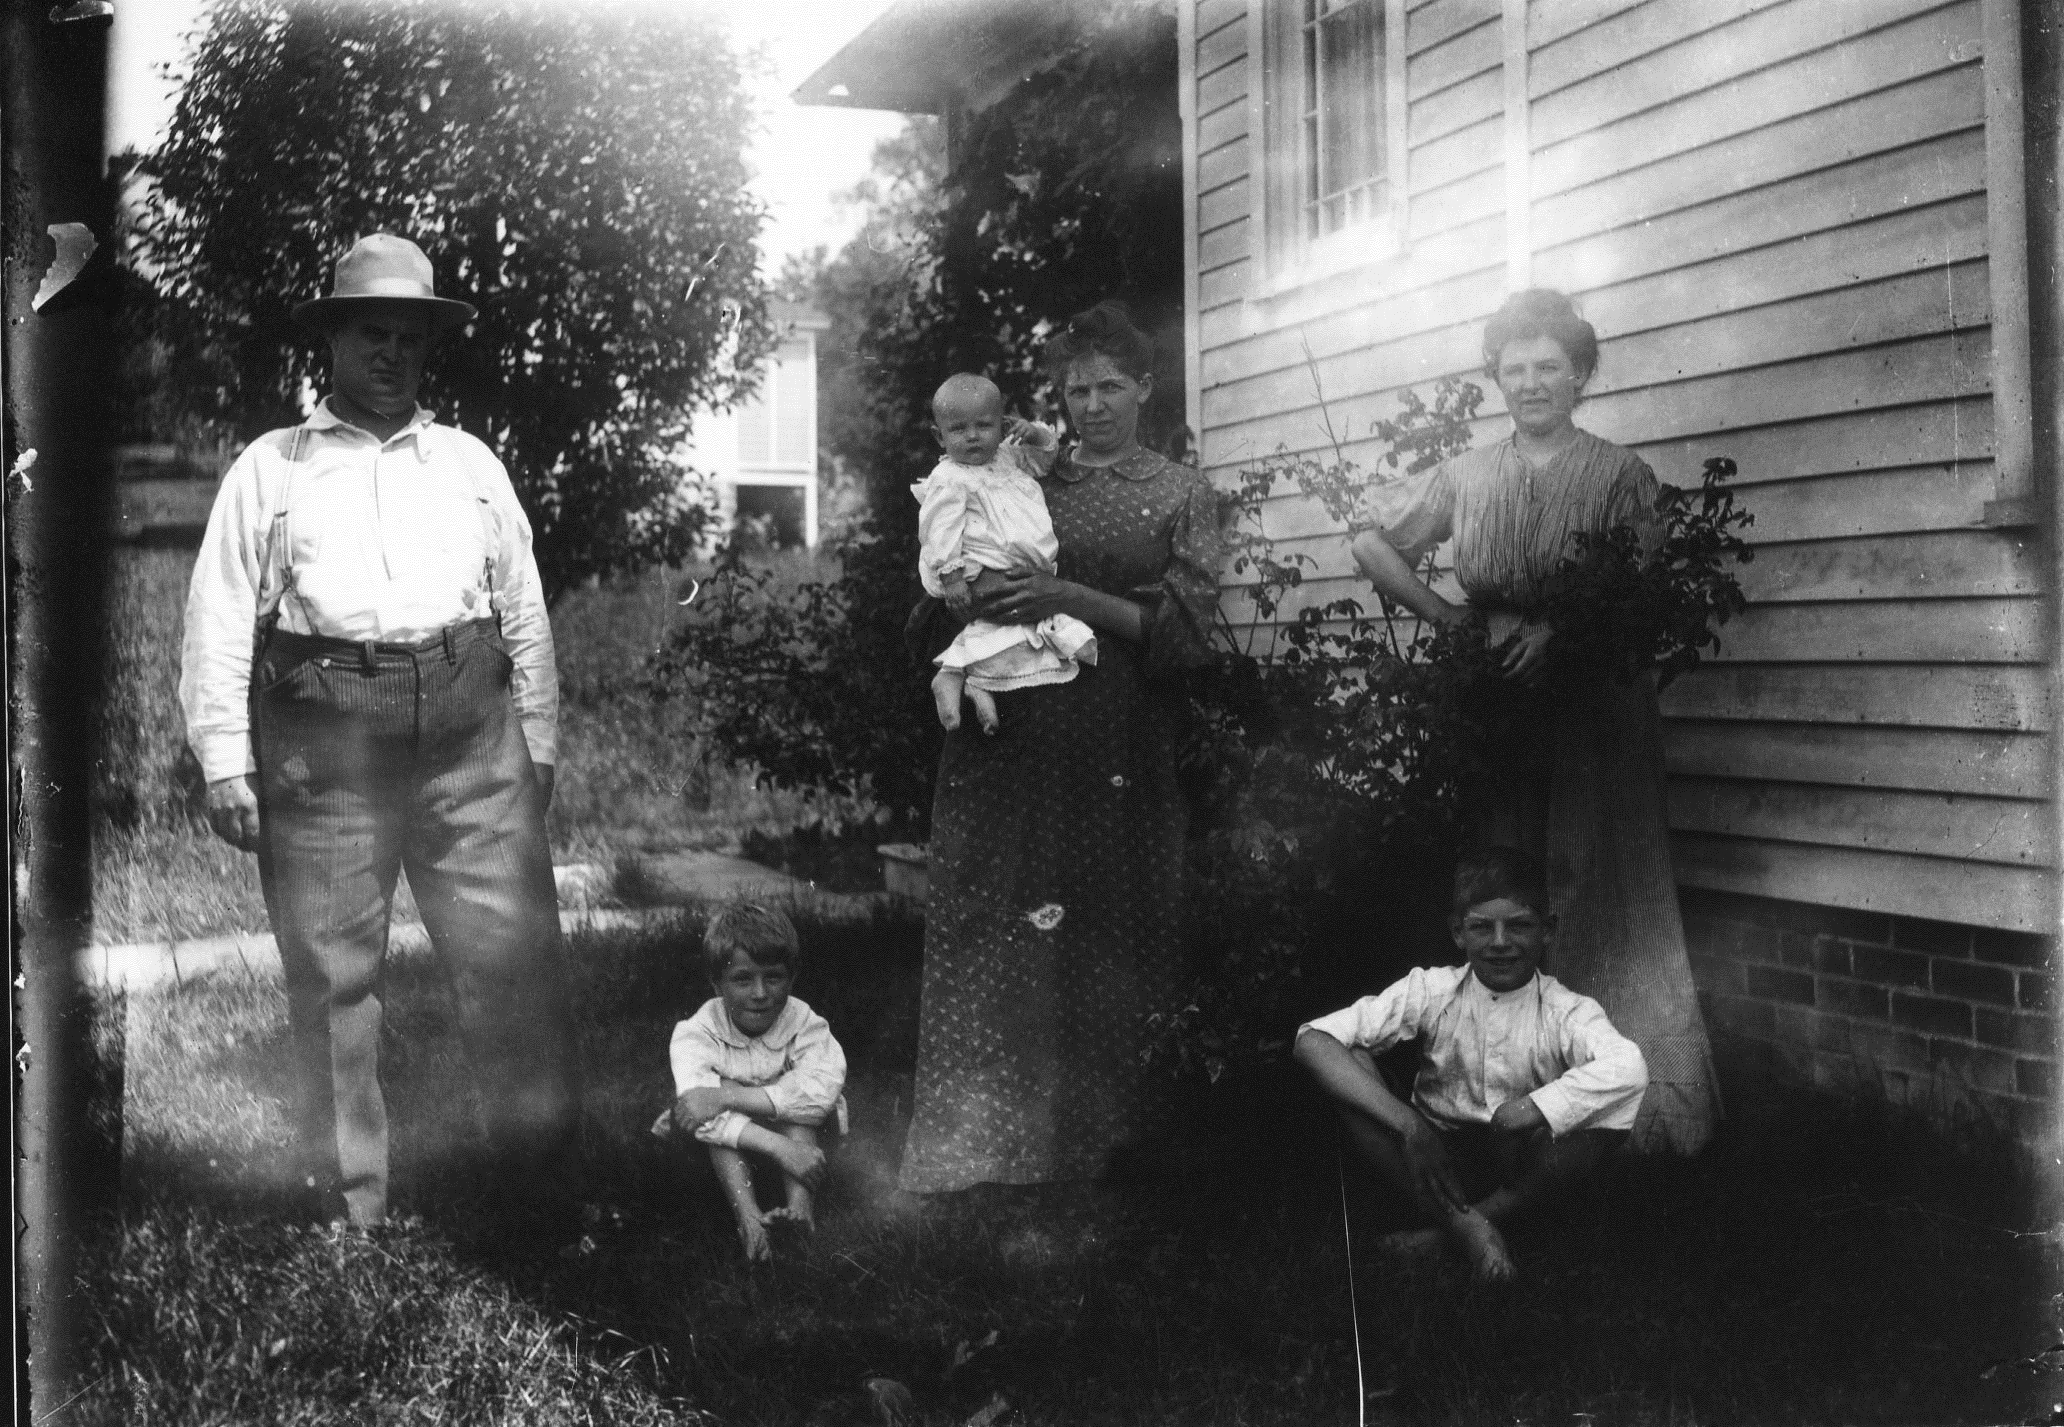 photo of Unidentified Family in front of a House